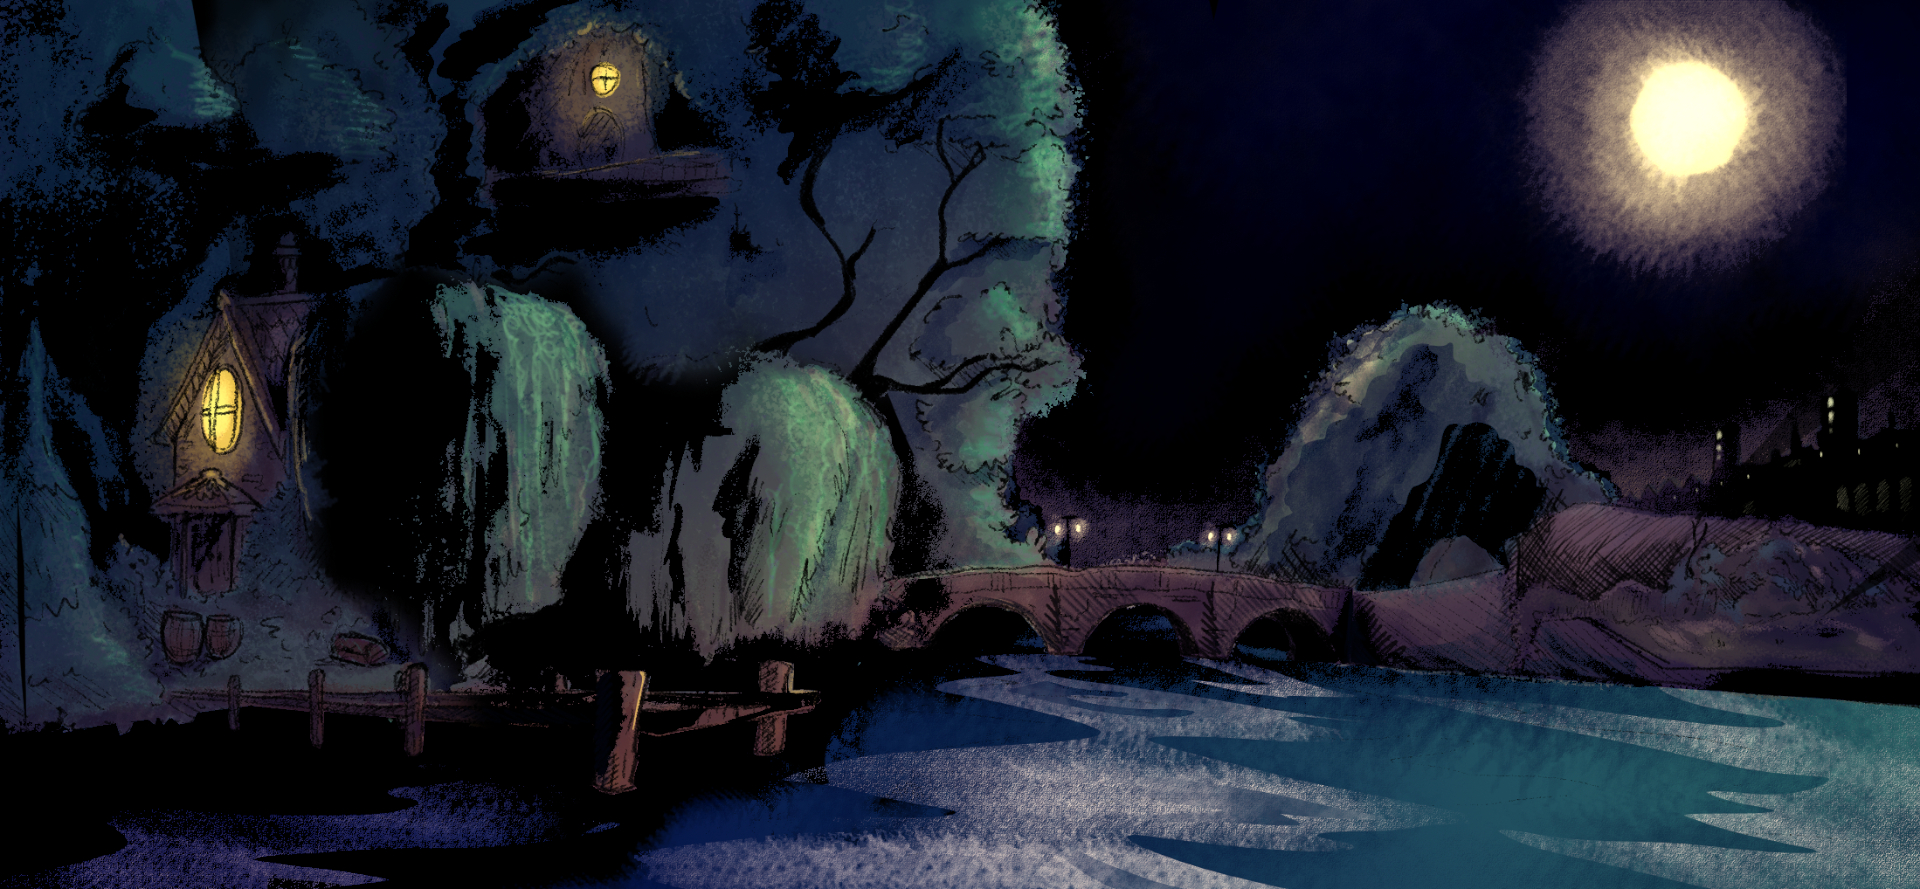 Background from my animation 'Cambridge River Pirates'